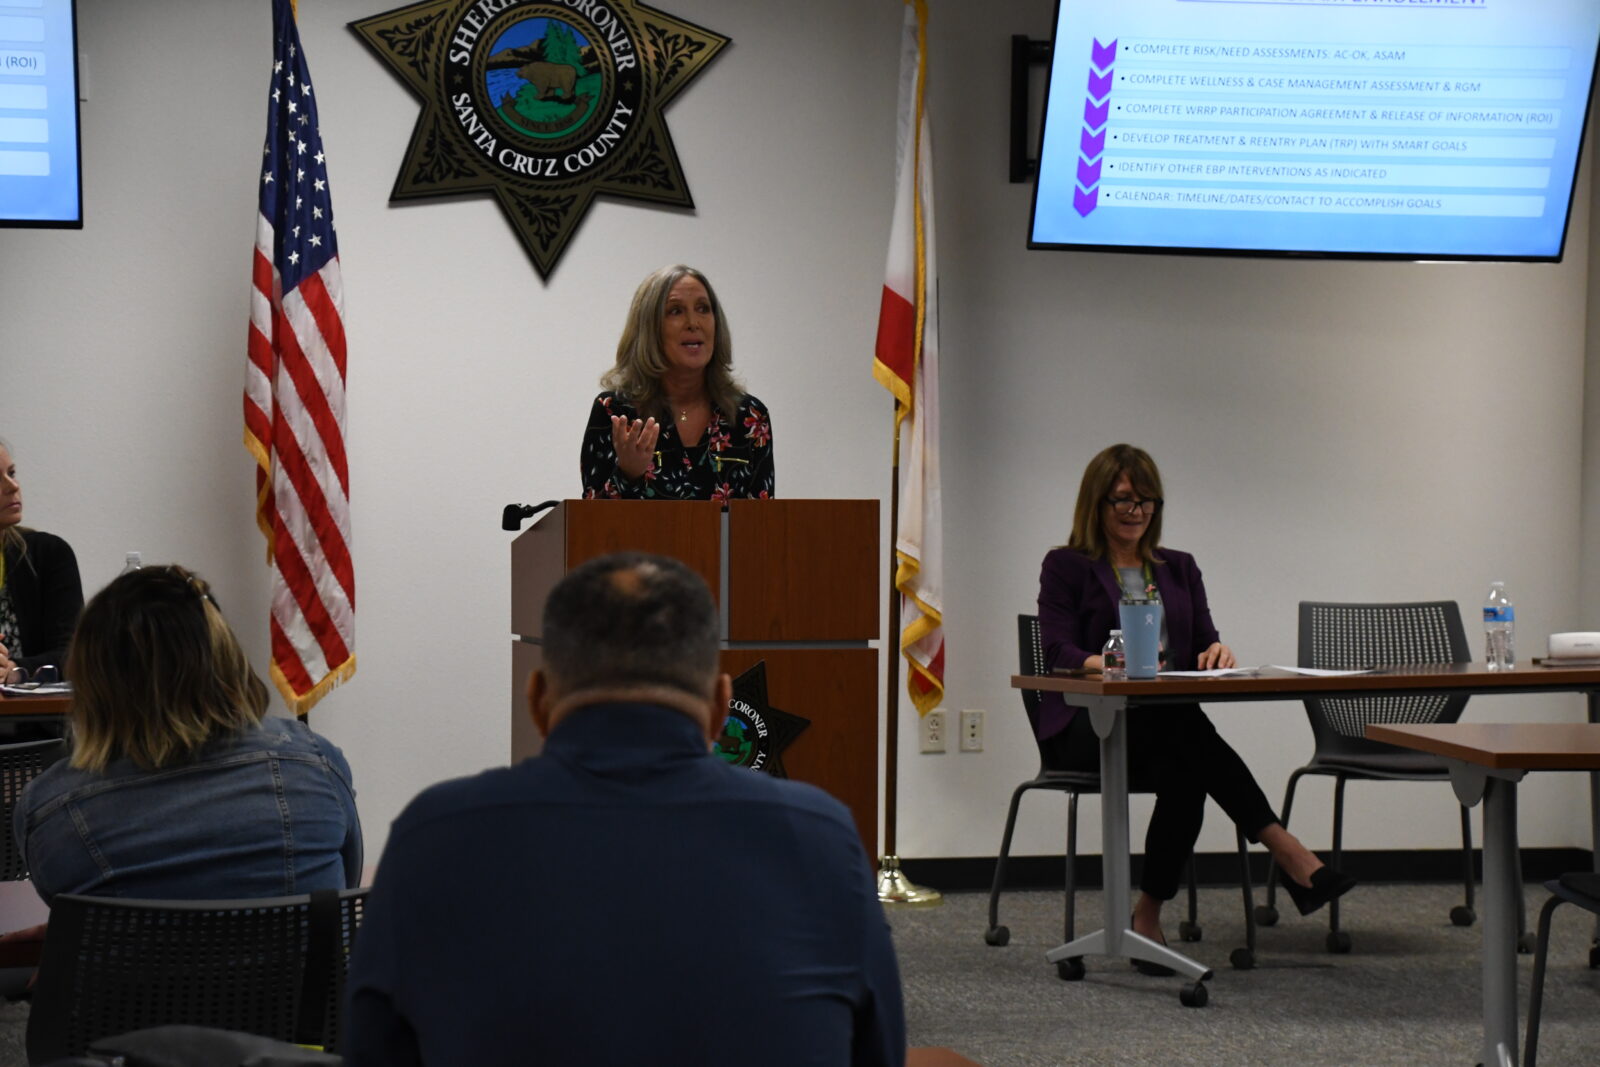 Friends Outside, a program of the Volunteer Center of Santa Cruz County, is proud to partner with the Santa Cruz County Sheriff's Office and we are thrilled that our innovative efforts to provide individualized support programs that prepare incarcerated women for community integration, wellness and recovery have been recognized.